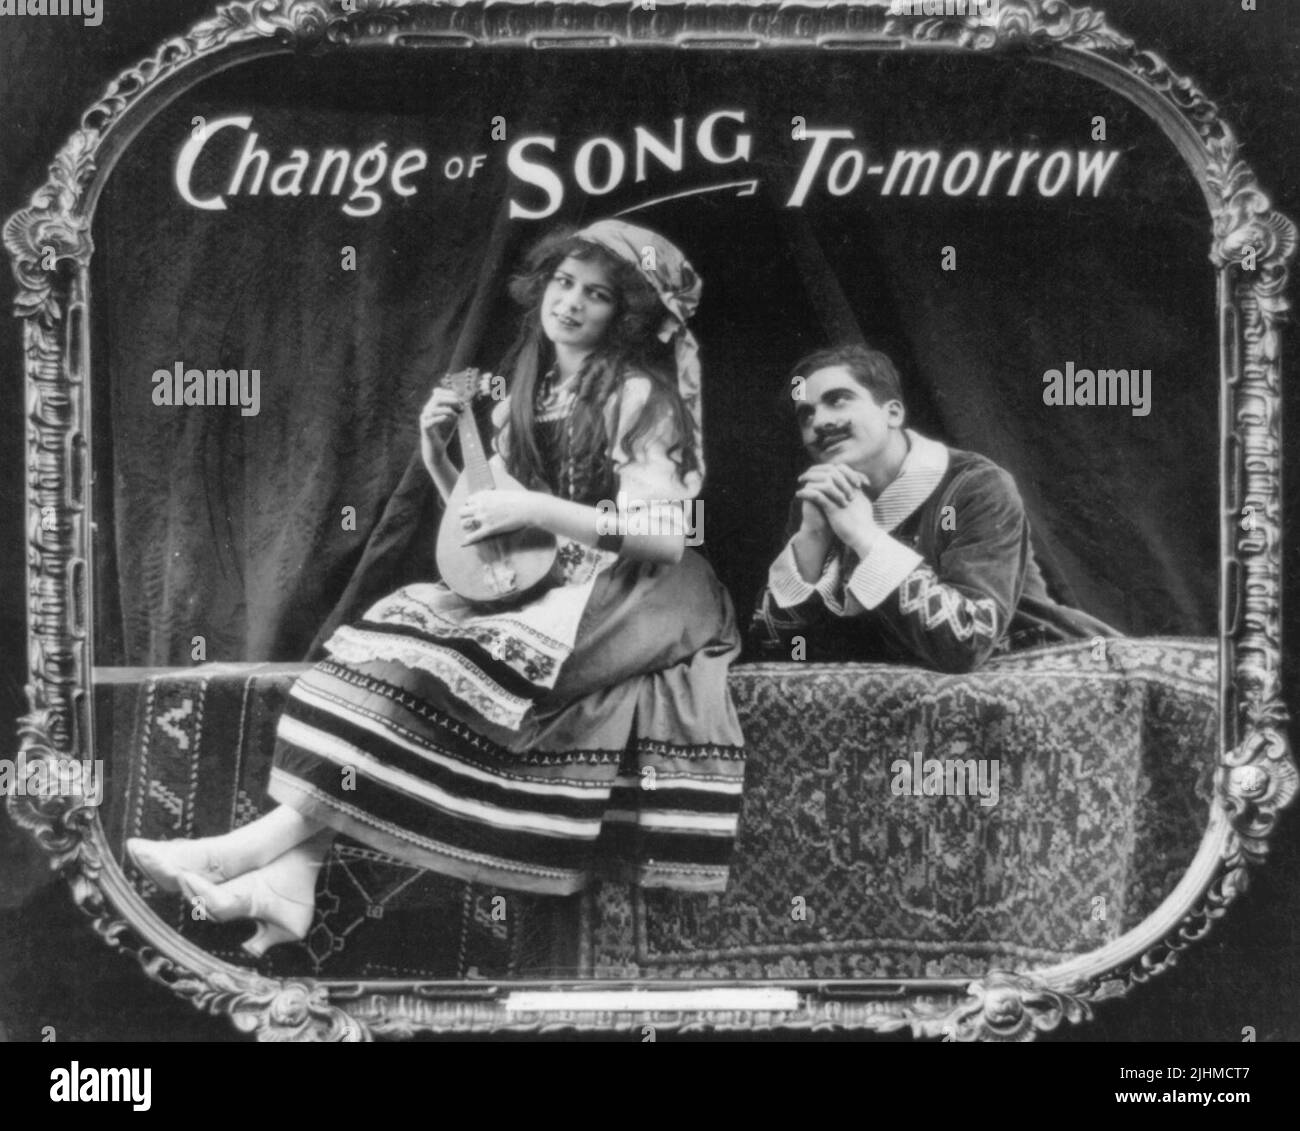 Change of song tomorrow - Photo shows a woman playing a musical instrument while a man admires her. Positive paper print from lantern slide used in motion picture theaters as announcement. Stock Photo